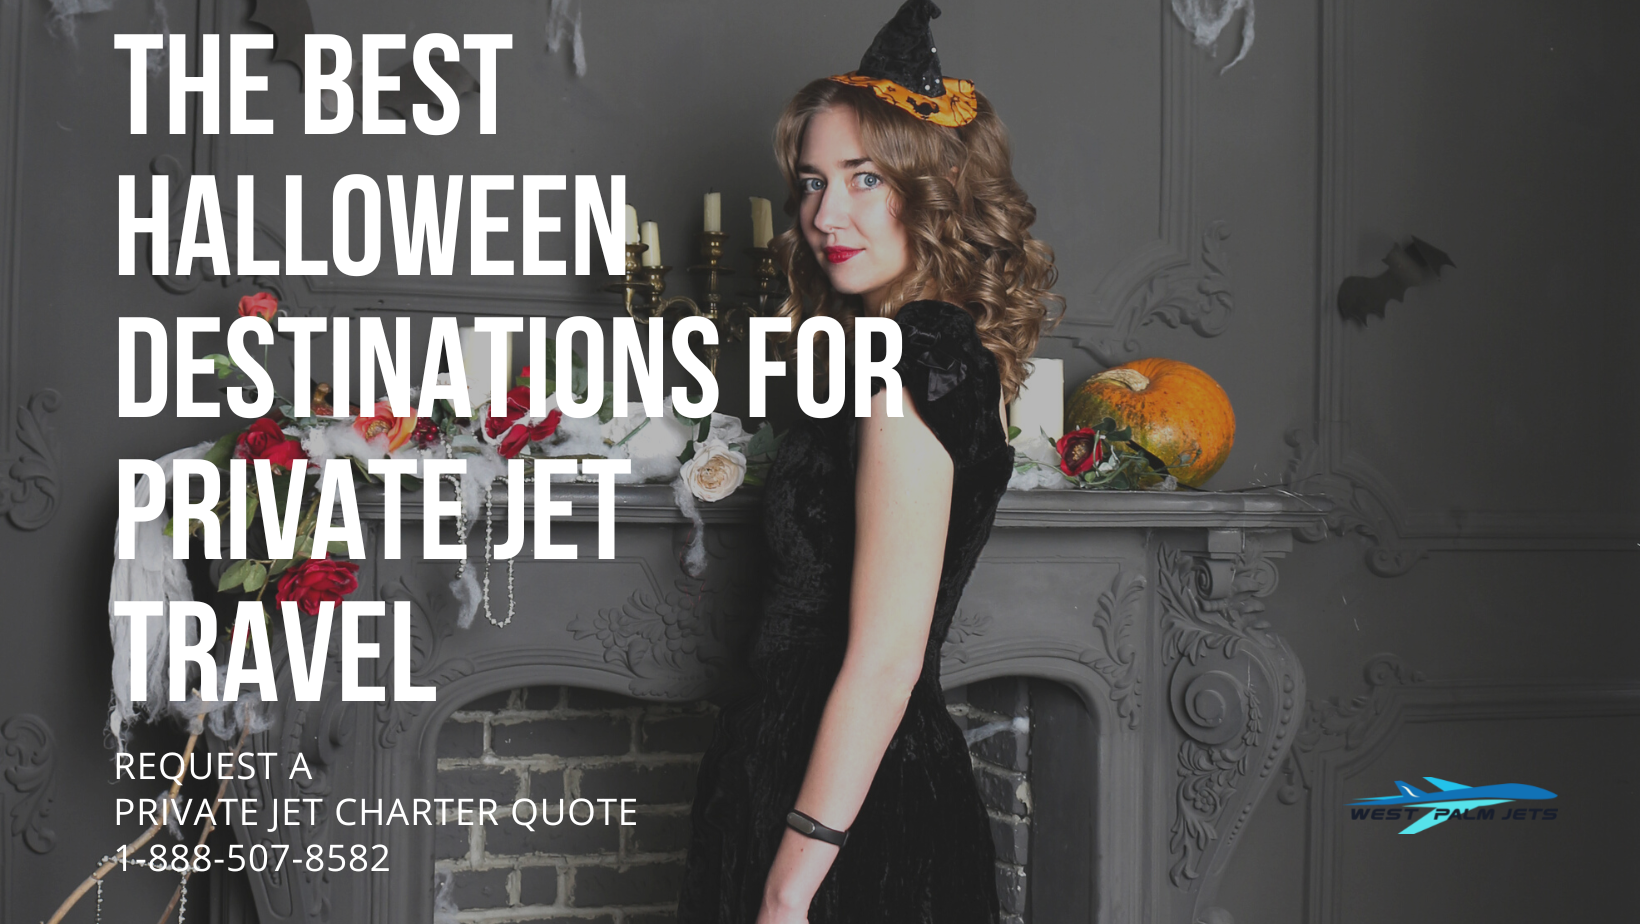 The Best Halloween Destinations for Private Jet Travel